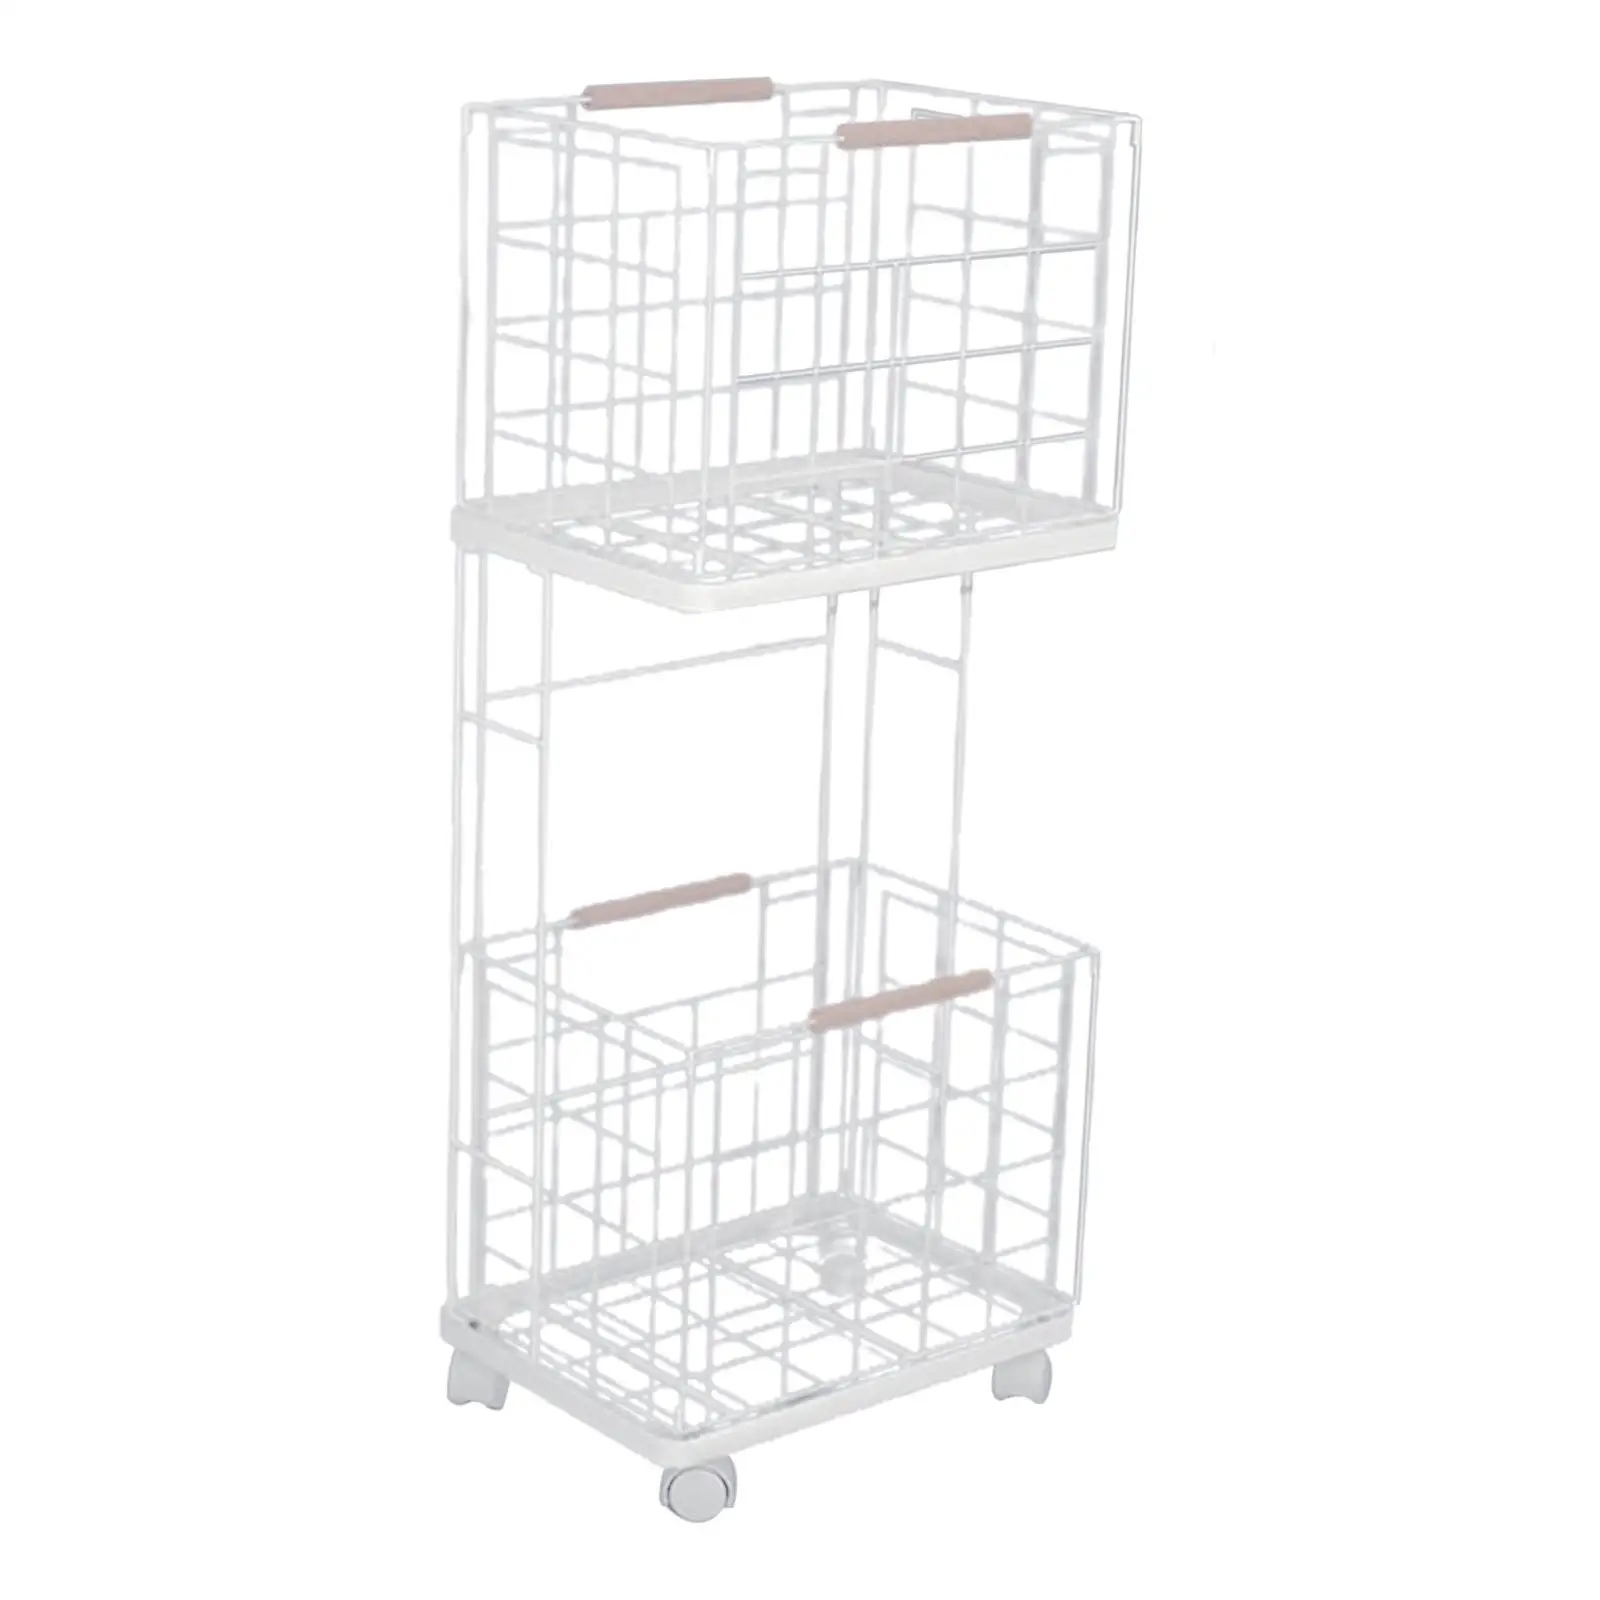 2 Tier Storage Cart Large Capacity with Wheels Removable Multifunctional Laundry Clothes Basket Storage Rack for Home Farmhouse